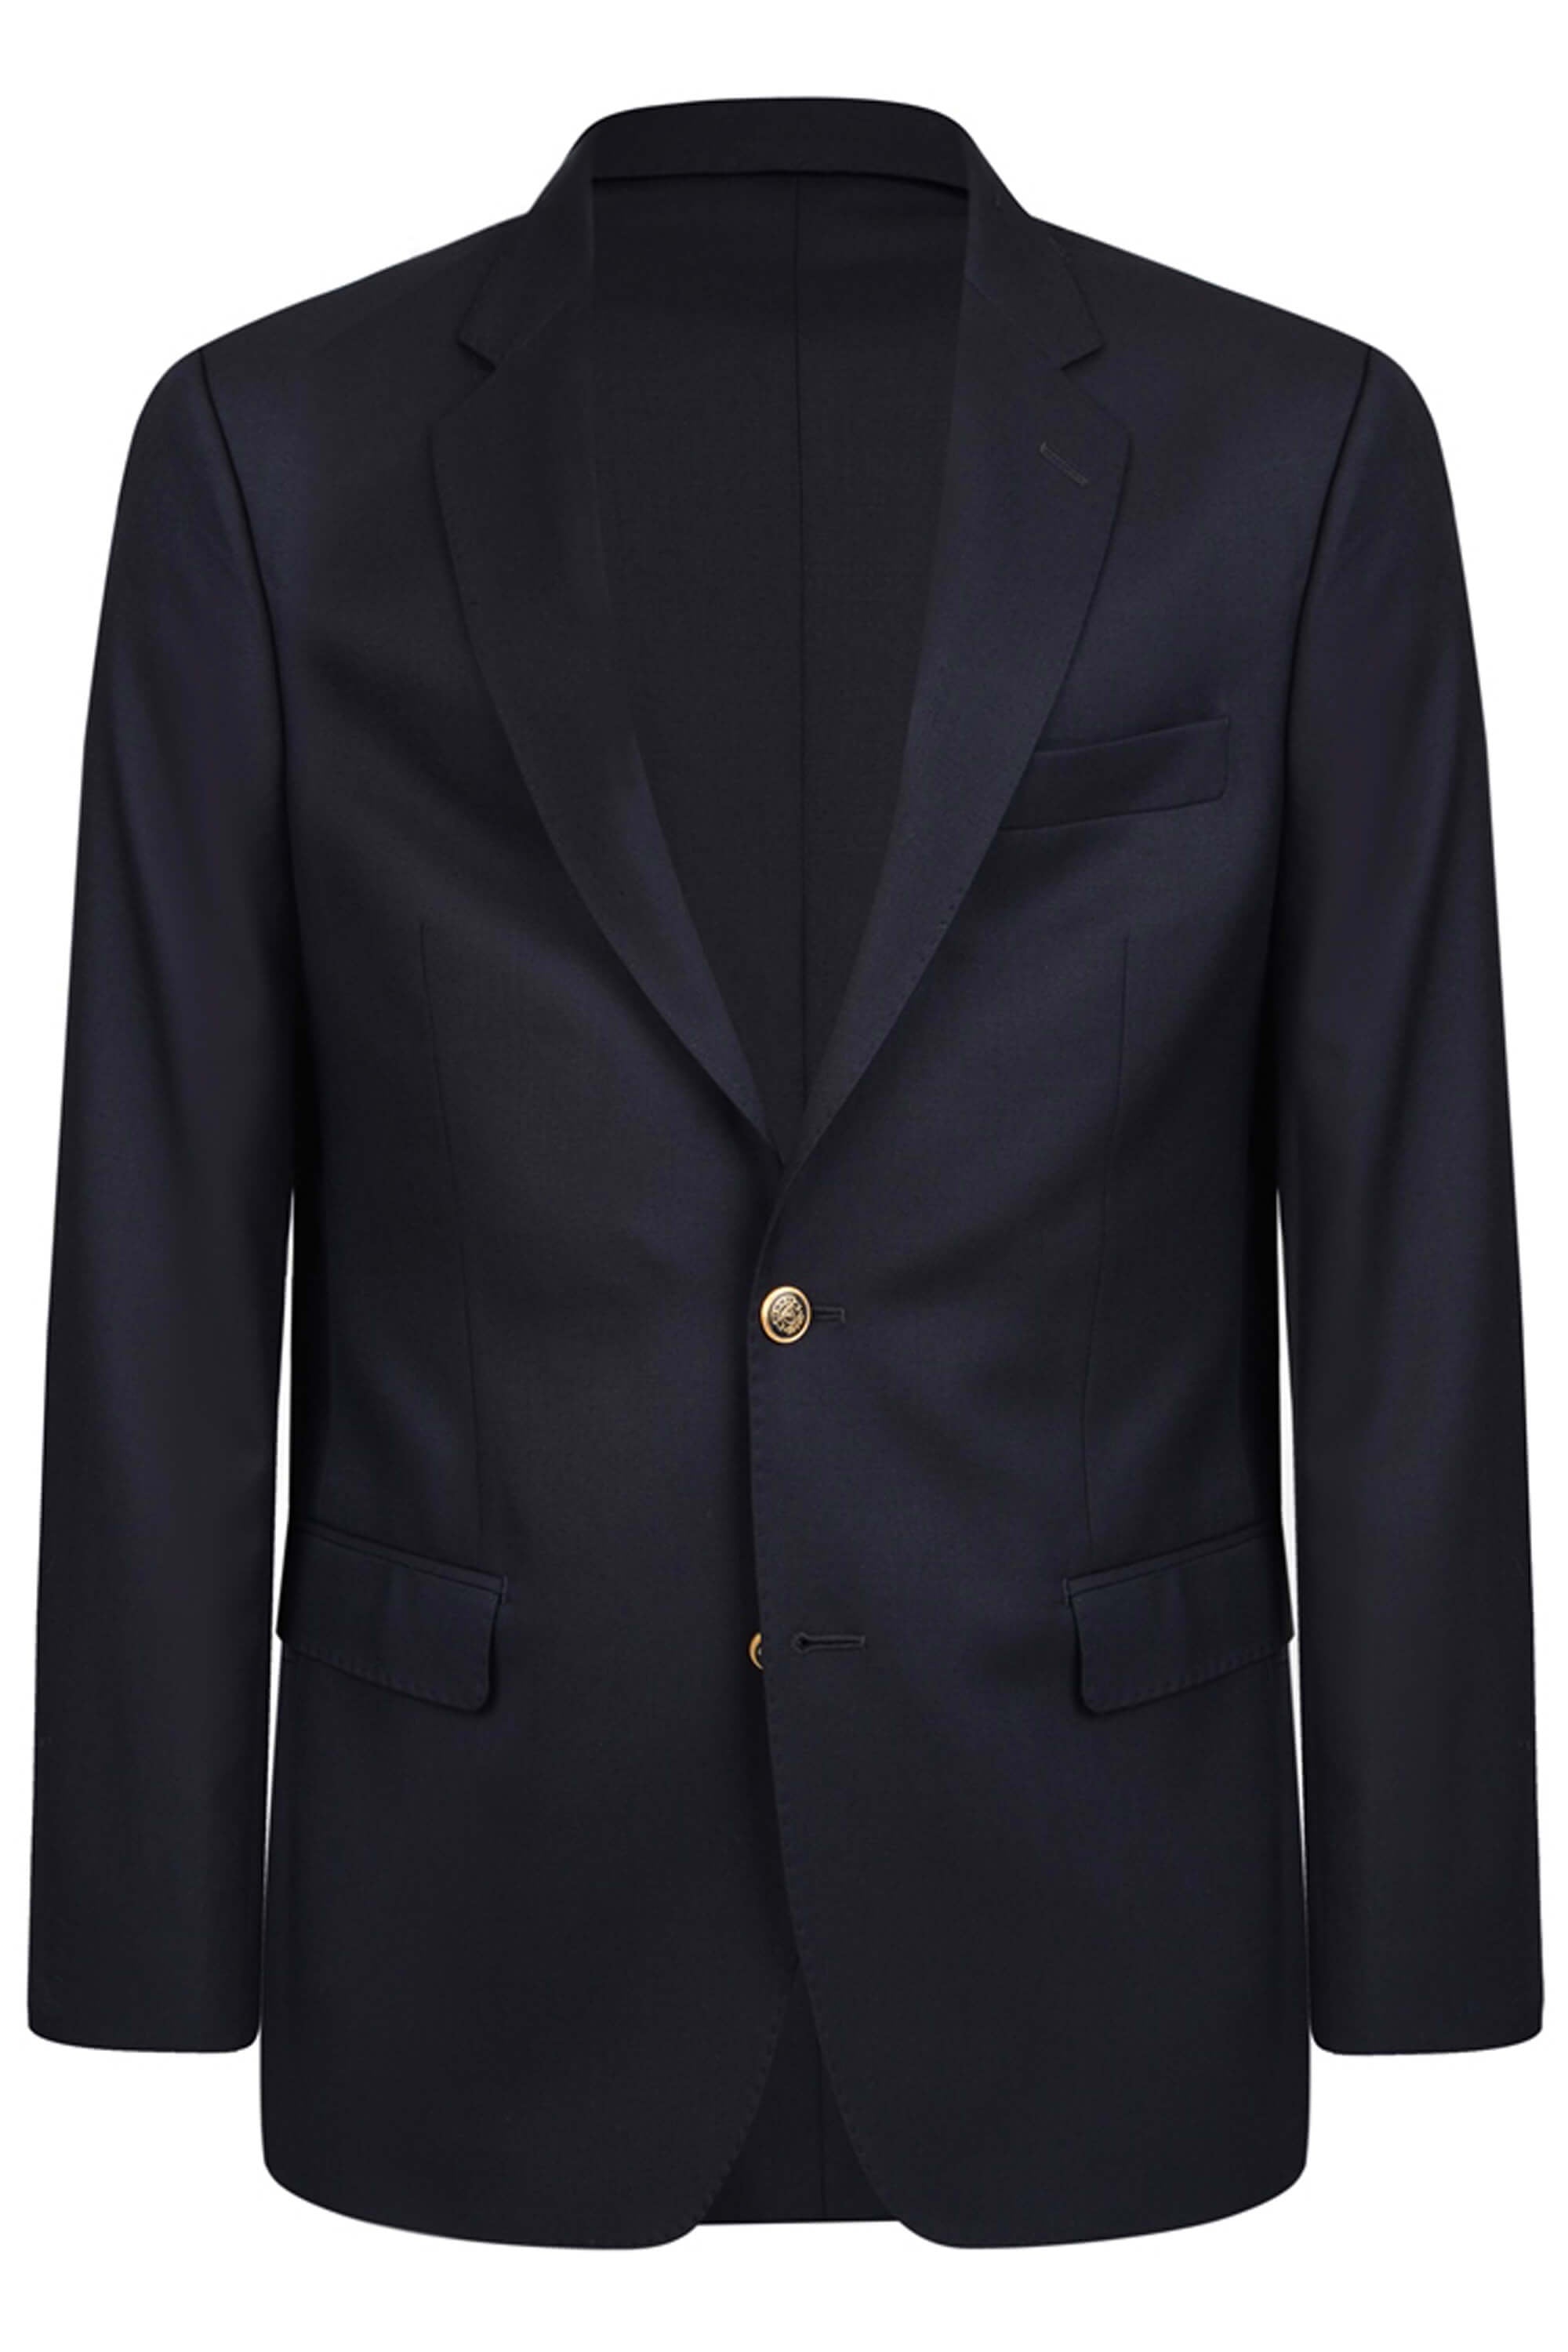 Magee Classic Fit Single Breasted Blazer